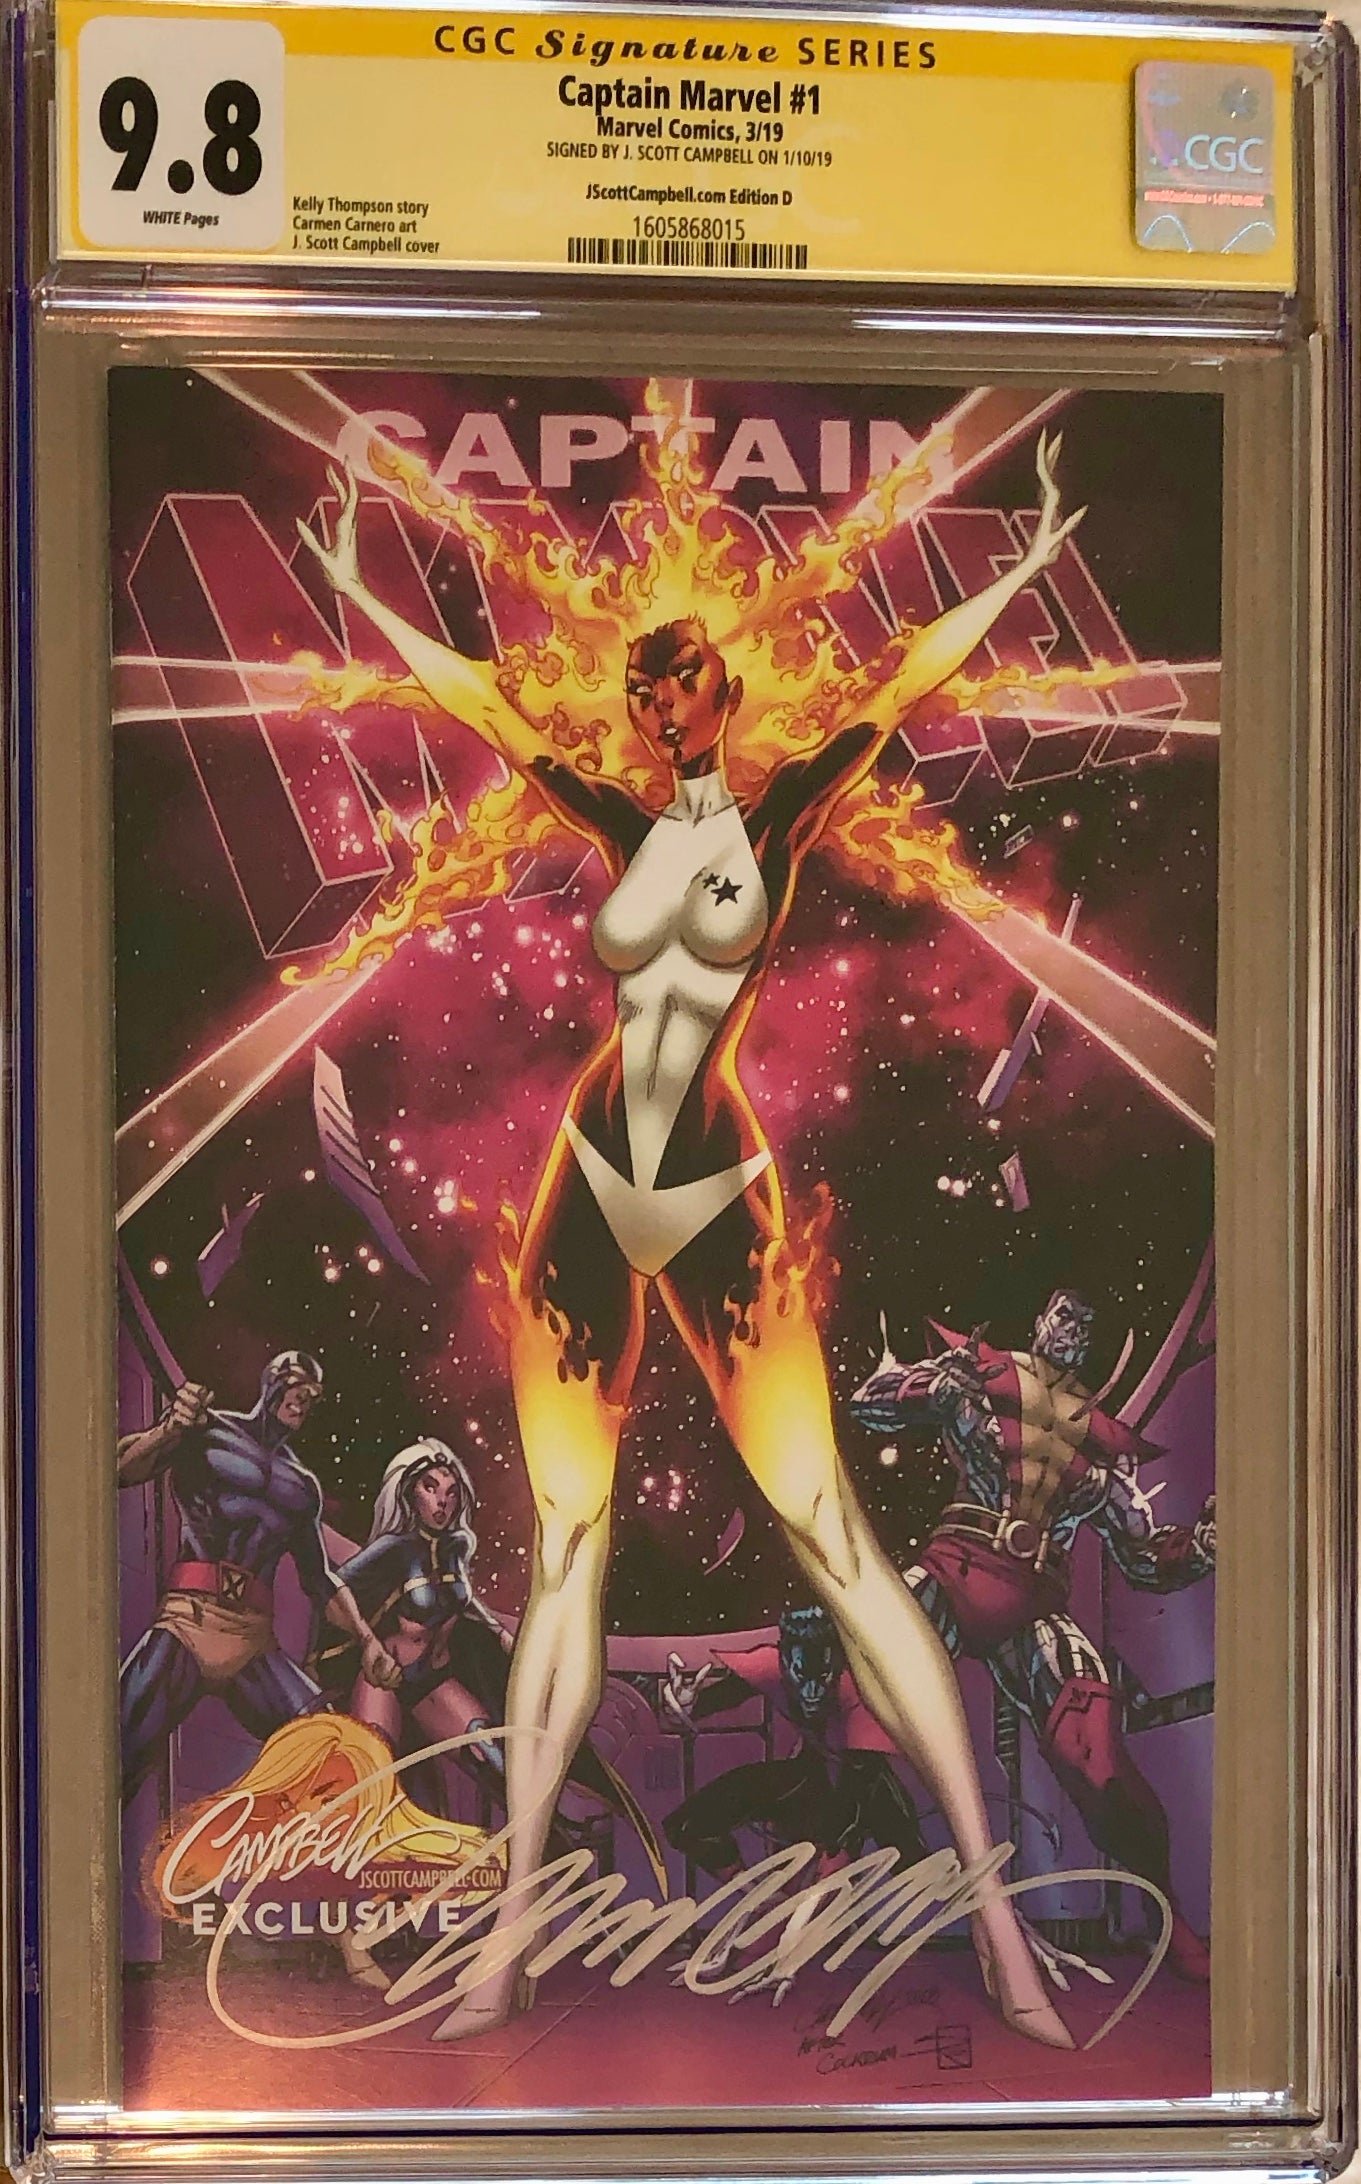 Captain Marvel #1 J. Scott Campbell Edition D "Binary" Exclusive CGC 9.8 SS